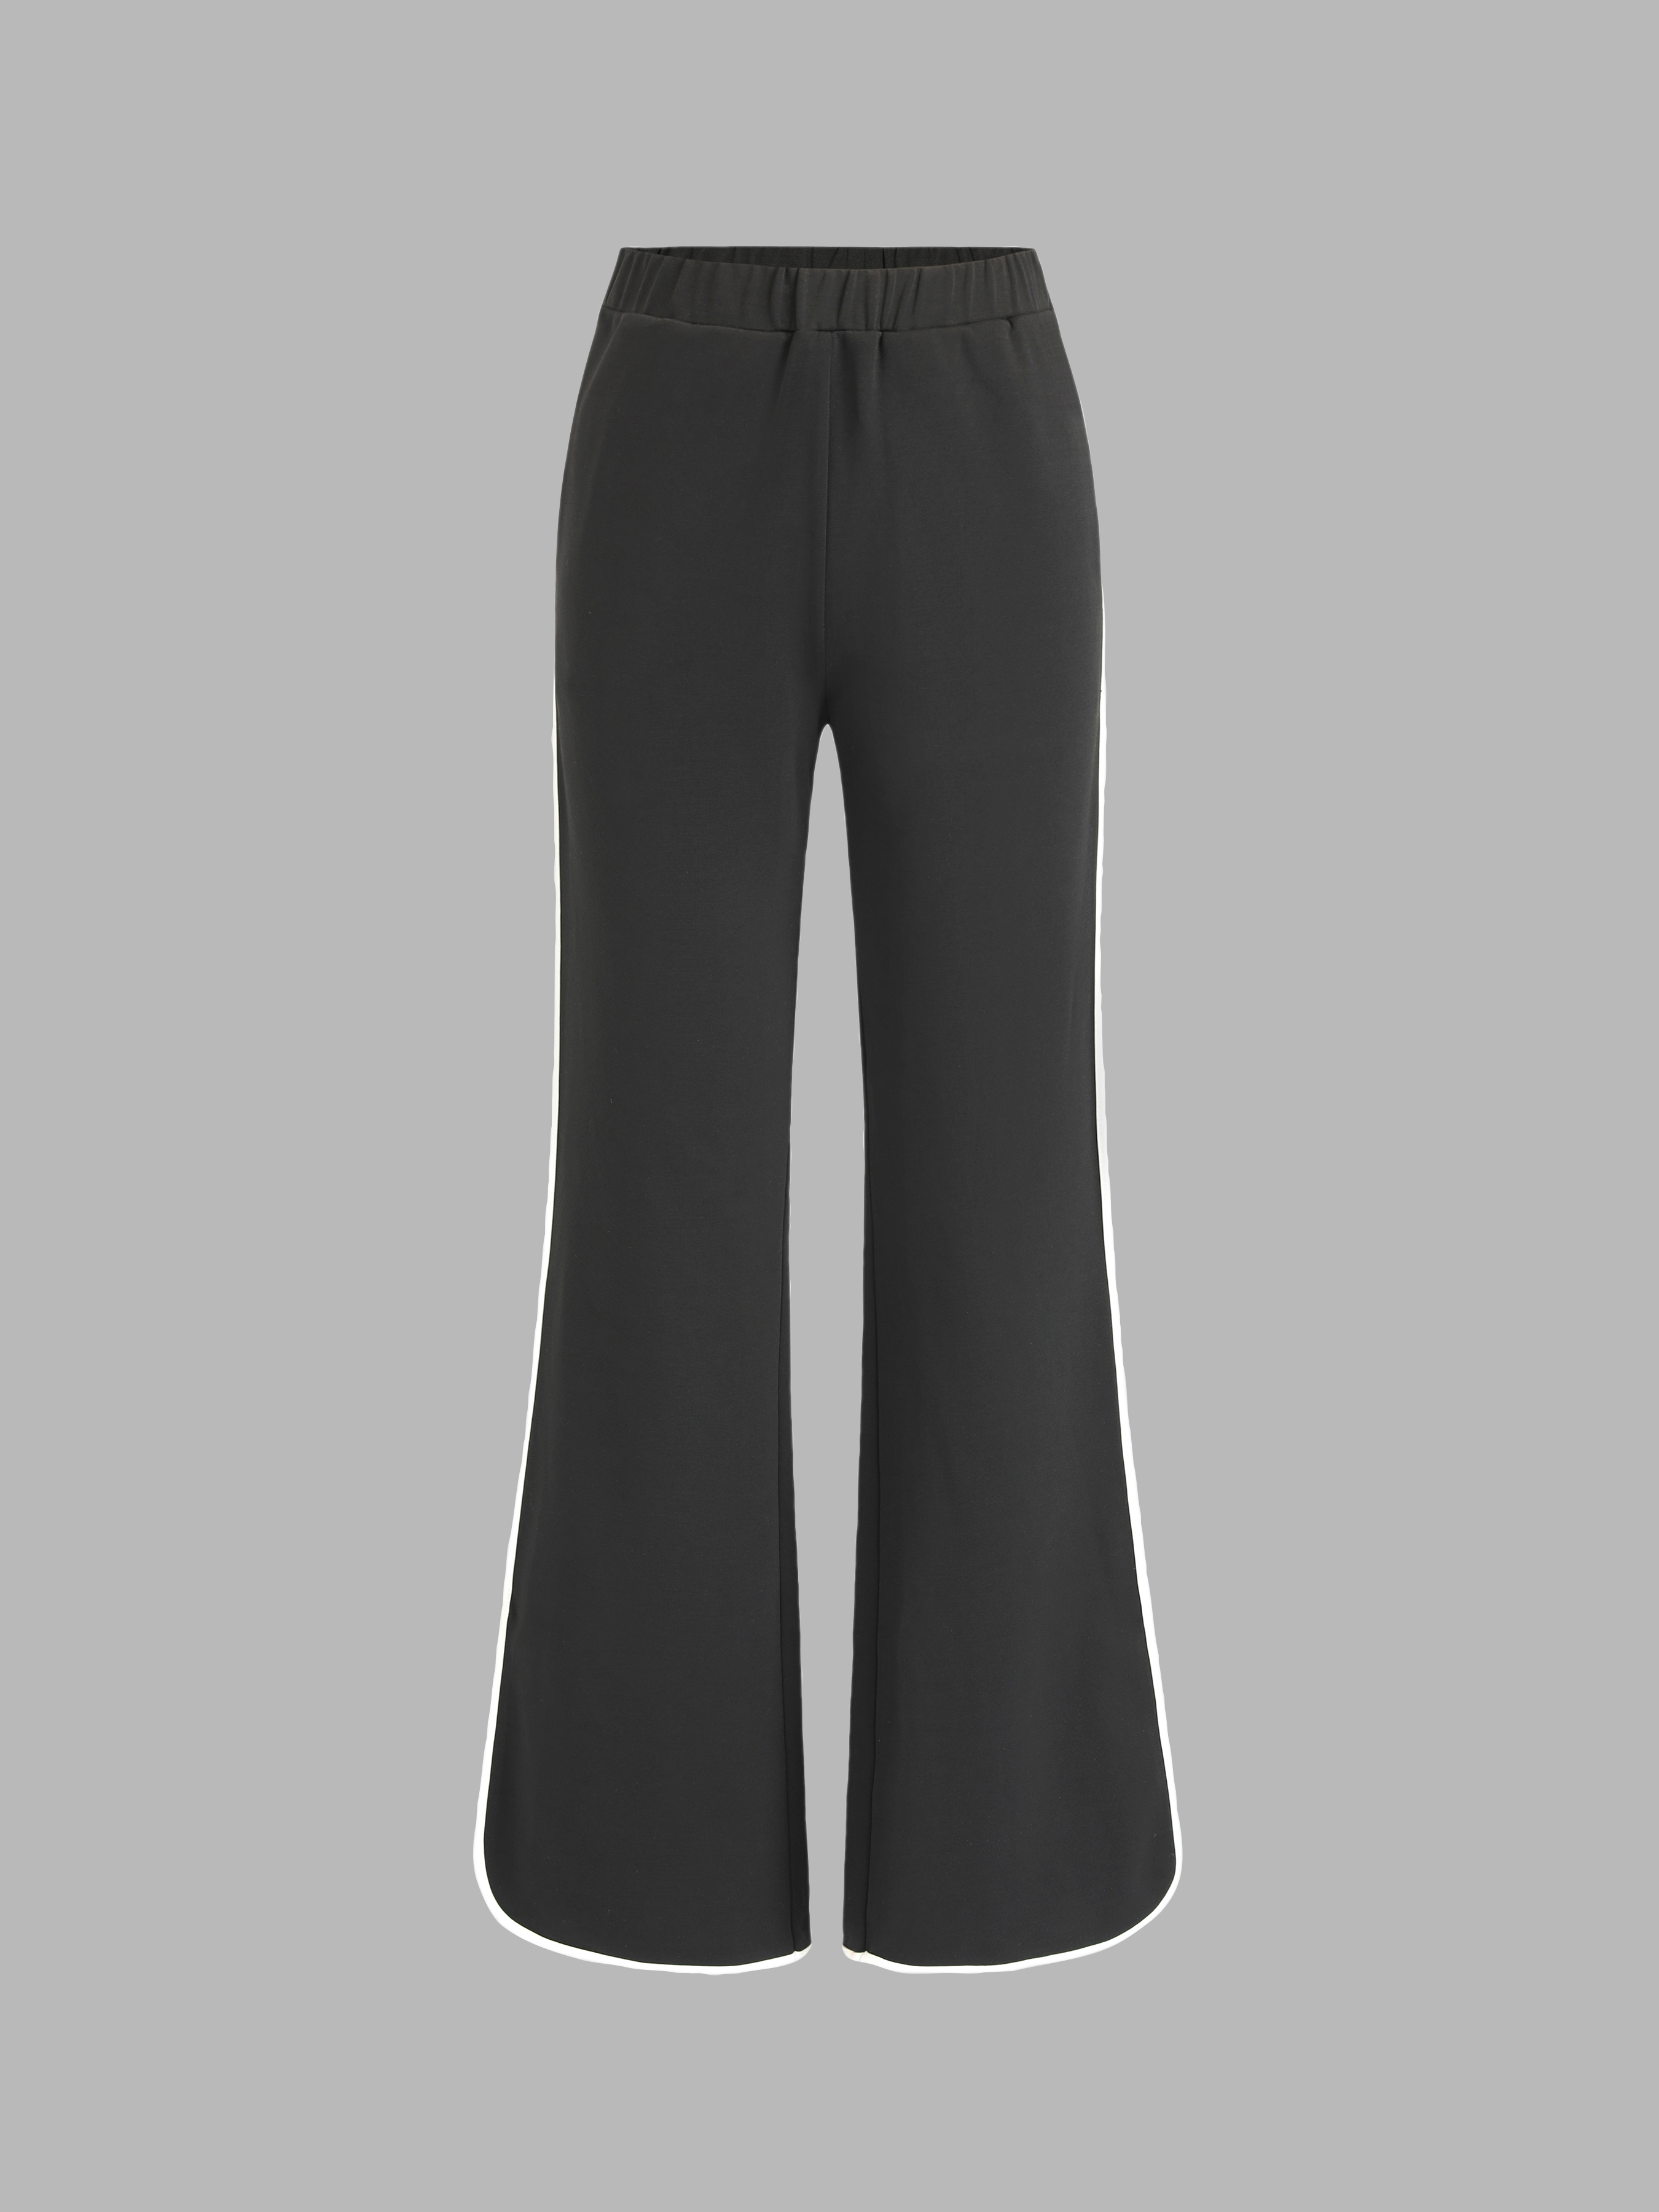 Sporty Slit Trousers - Cider